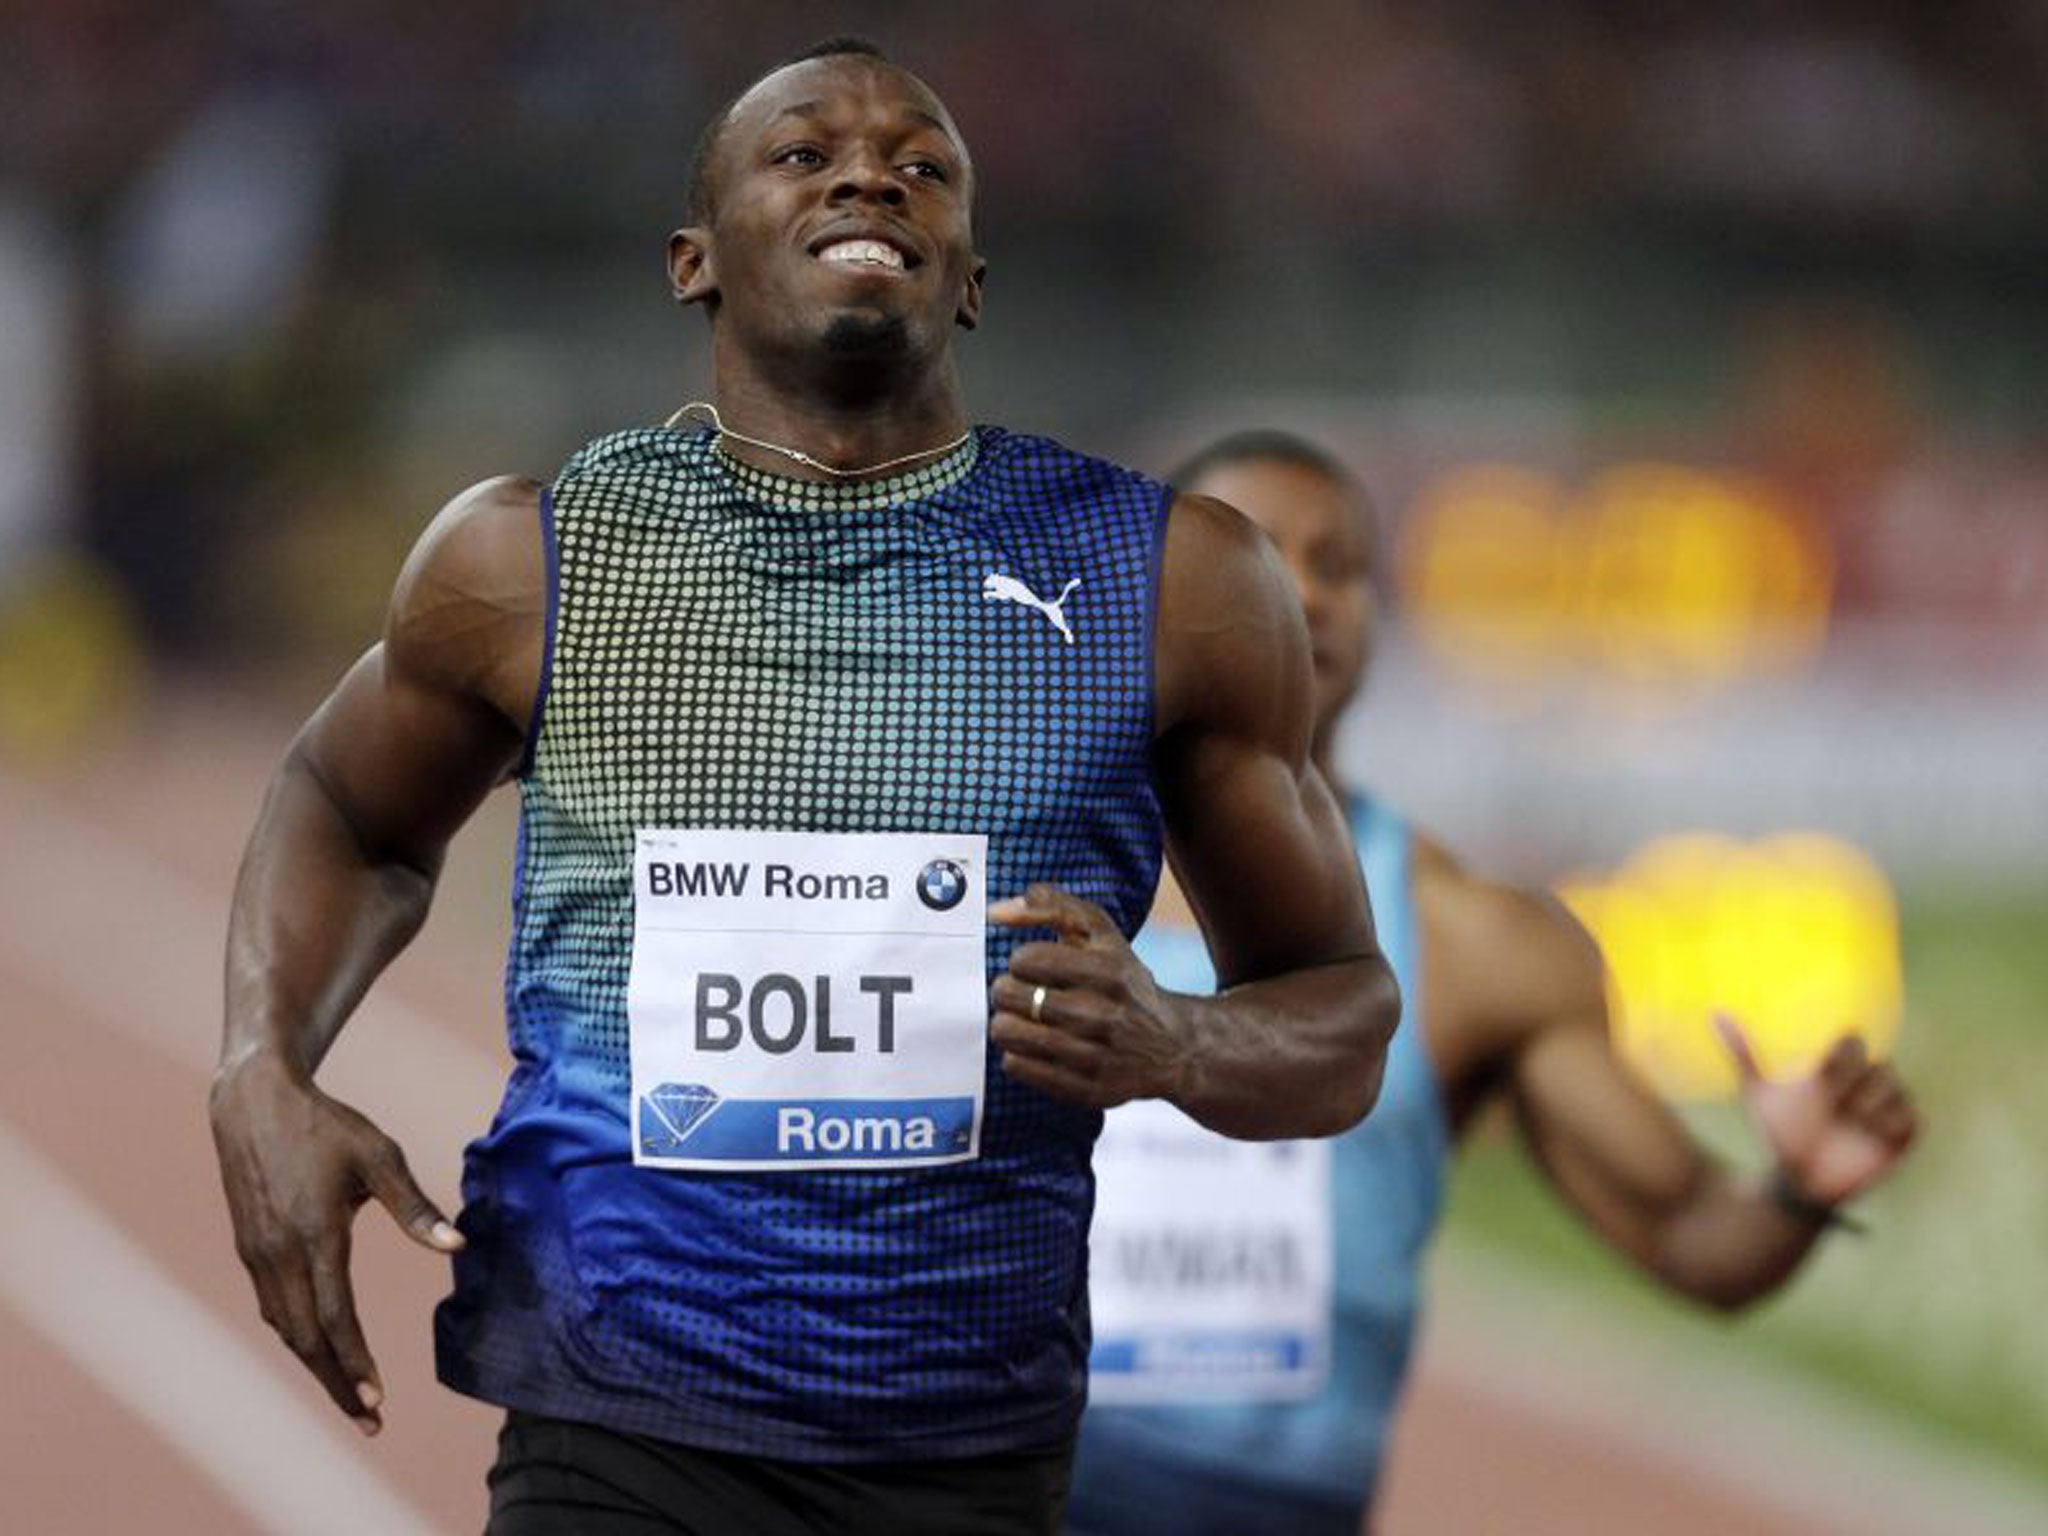 Usain Bolt finishes second in Rome, behind Justin Gatlin